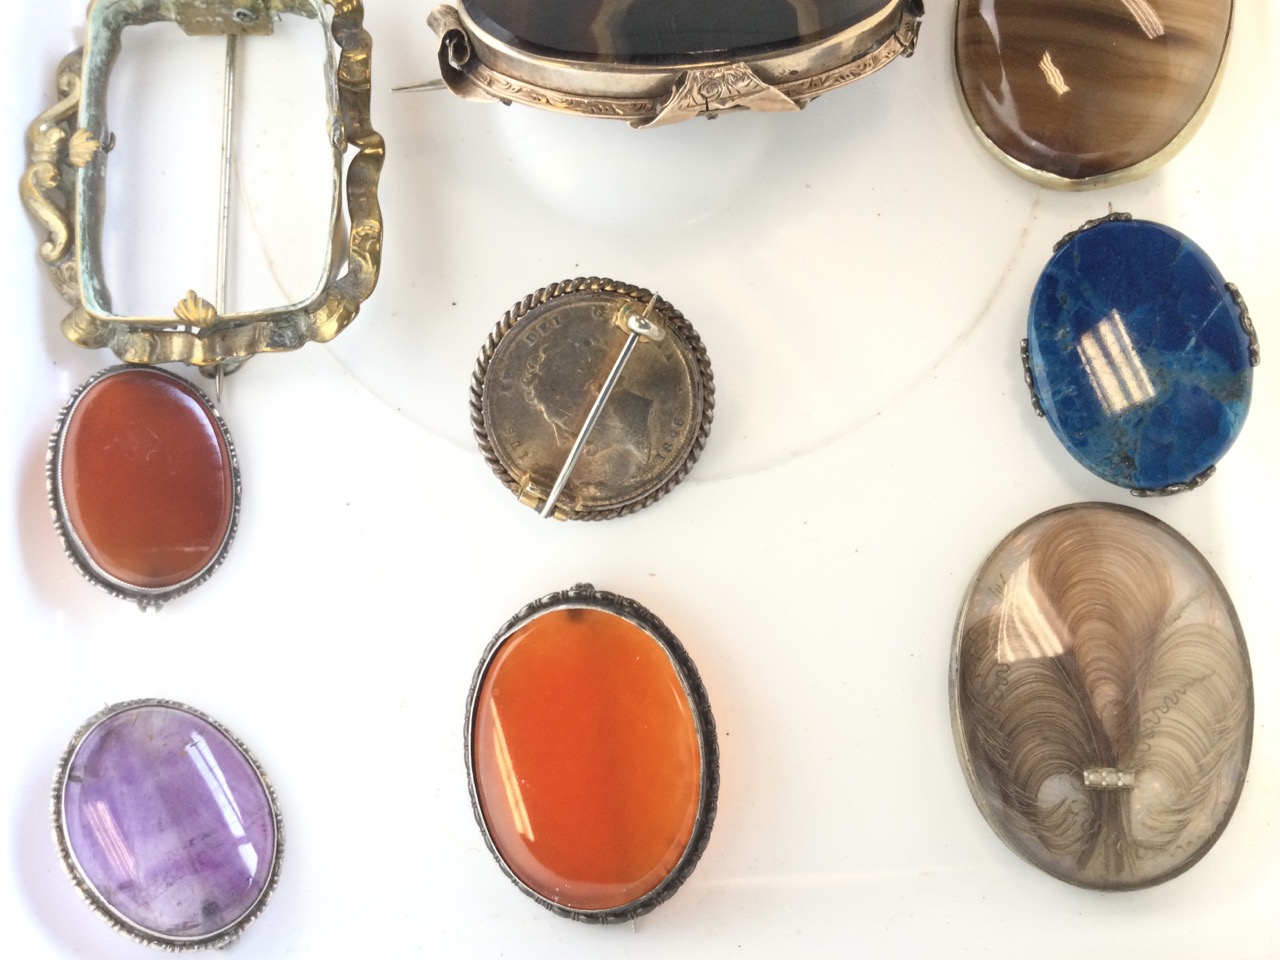 Twelve oval Victorian cabochon shaped brooches & pendants, silver & yellow metal, amber, polished - Image 3 of 3